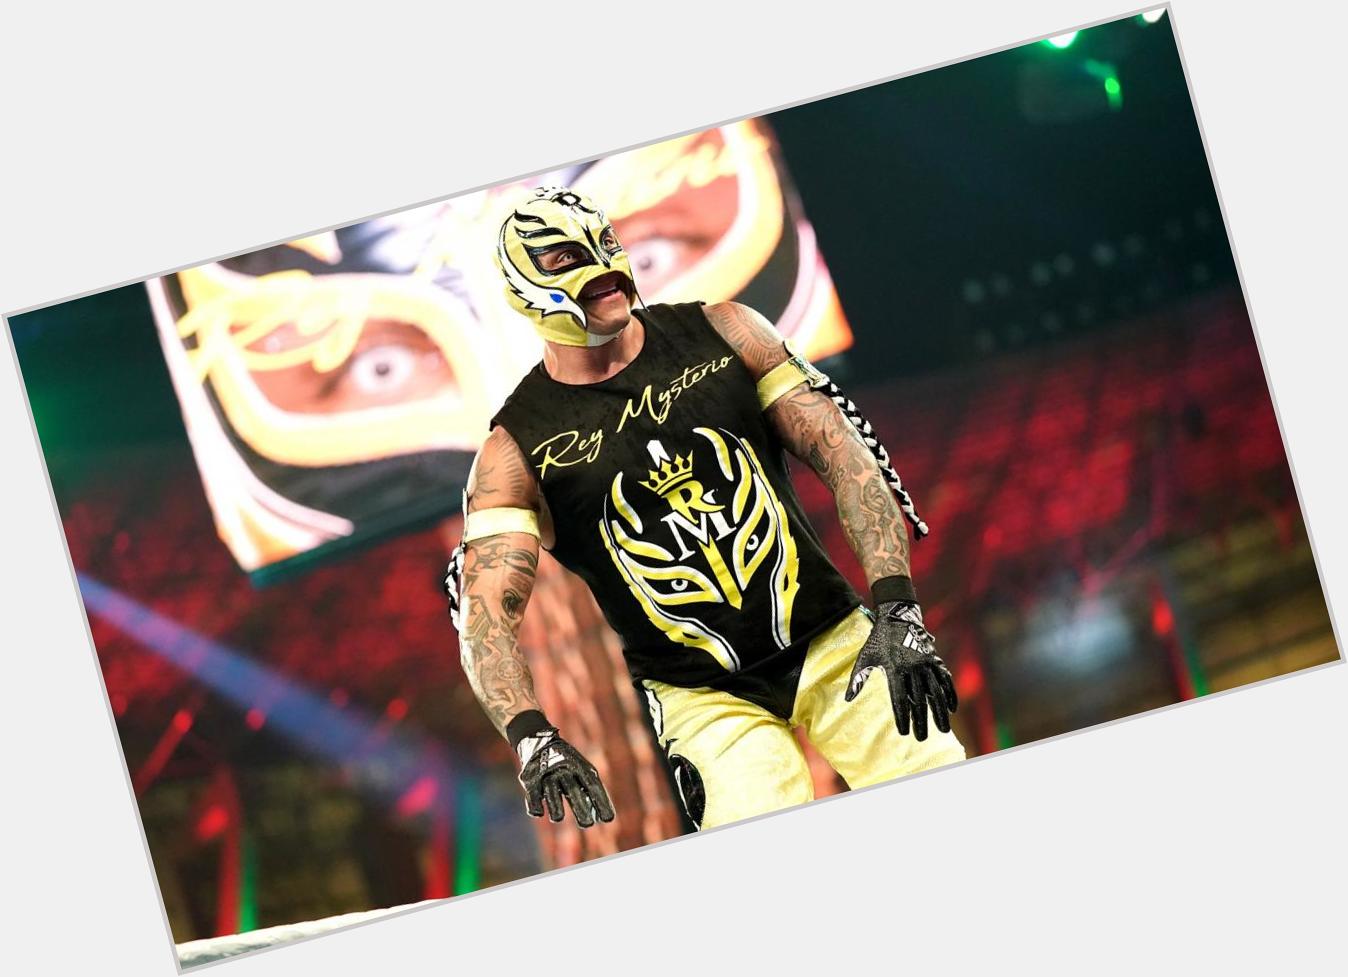 Happy Birthday to 5ft6 wrestler Rey Mysterio Jr, whose real identity remains...unknown 